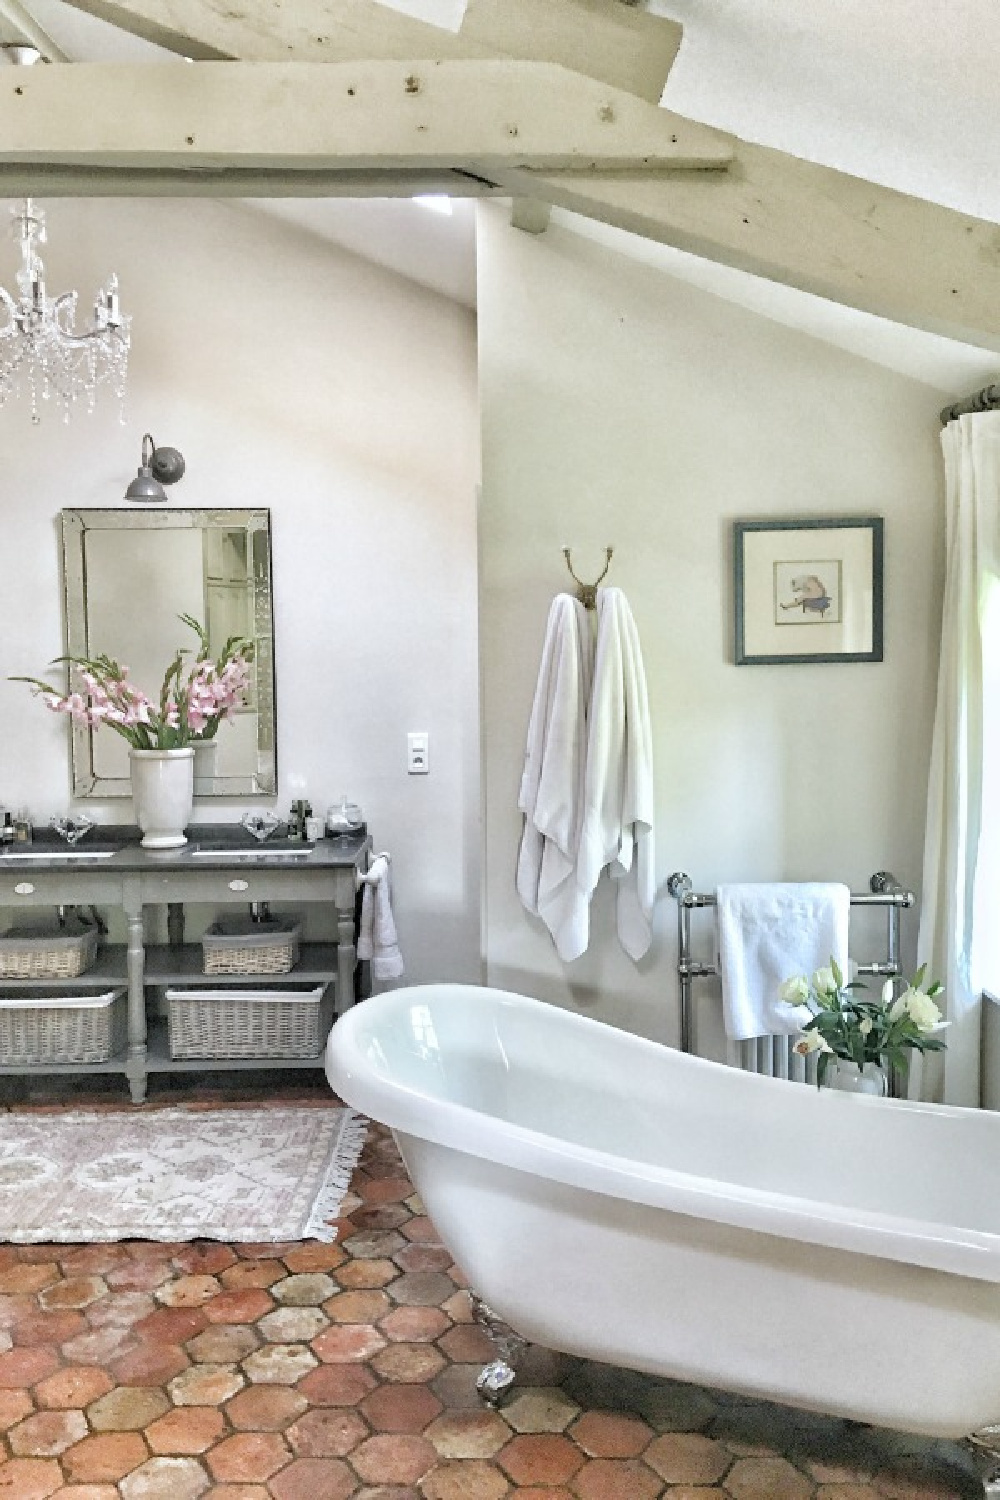 Old World style in a French country bathroom with soaker tub and Farrow & Ball gray paint colors.